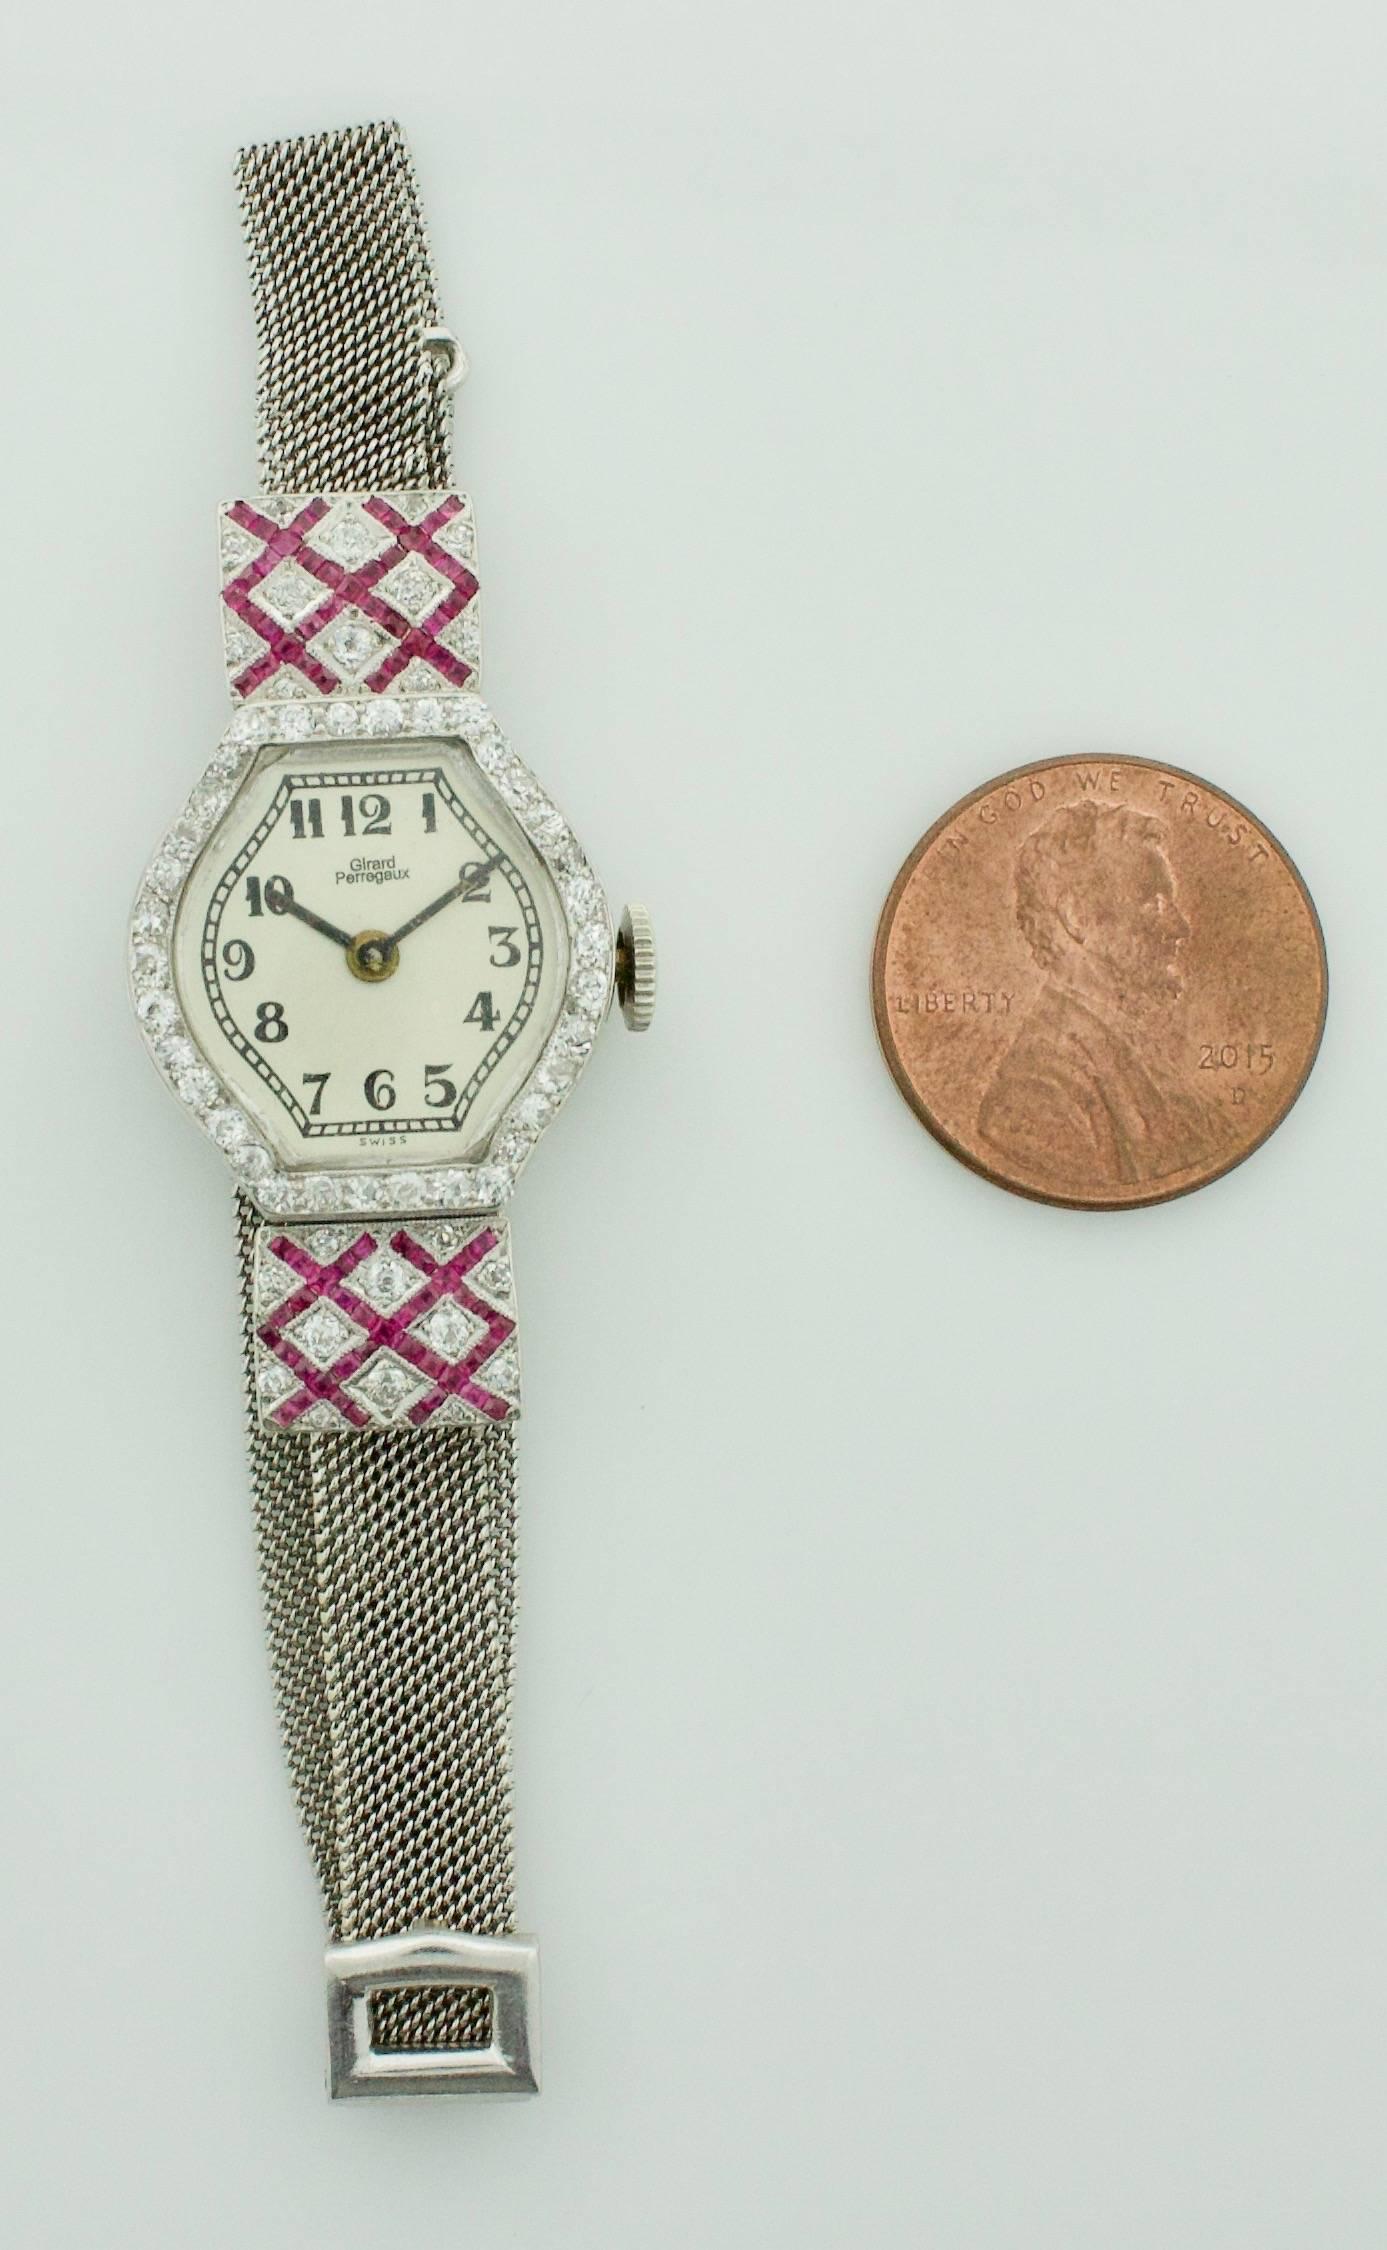 Extreme Art Deco Ruby and Diamond Circa 1920's Lady's Watch Girard Perregaux
Seventy Six Calibrated French-Cut Rubies Set in a Criss-Cross Pattern weighing ..80 carats approximatley 
Fifty Six Round Diamonds weighing .65 carats approximatley 
The